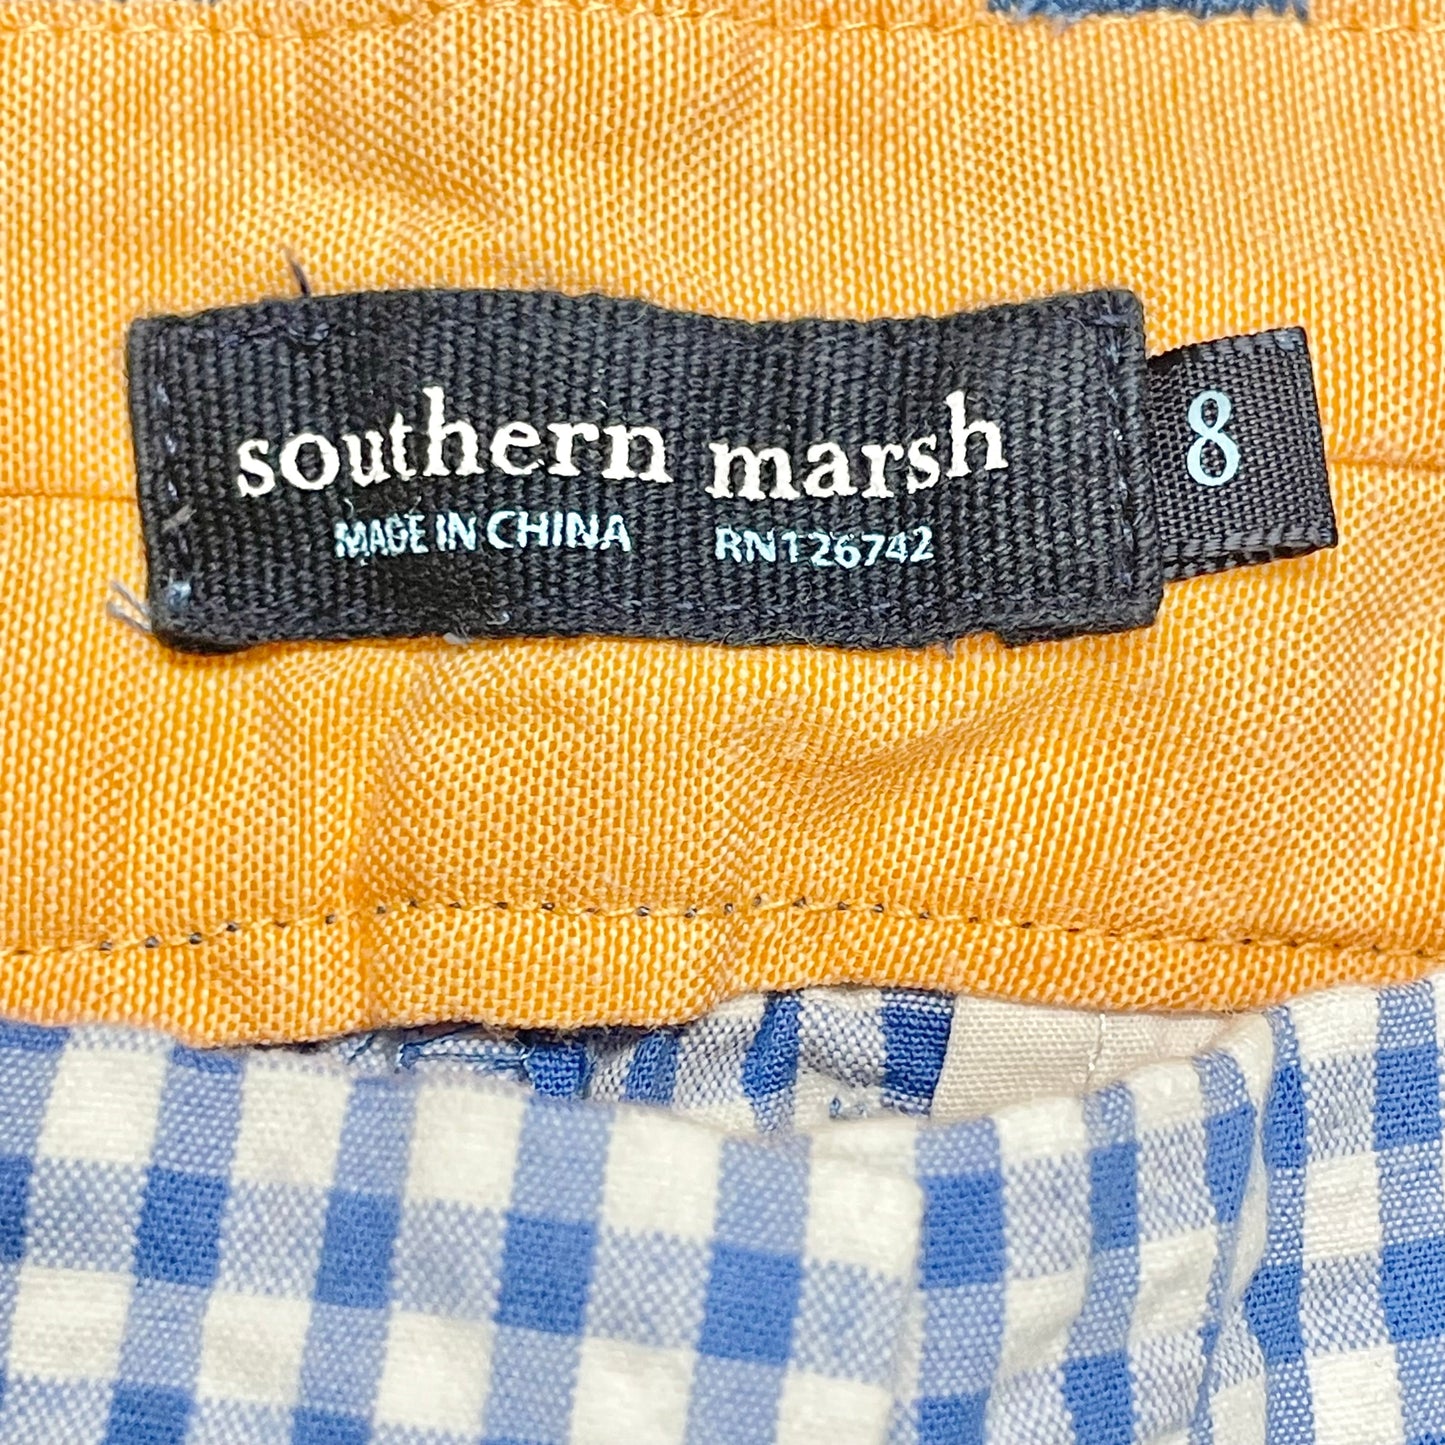 Blue & White Shorts By Southern Marsh, Size: 8